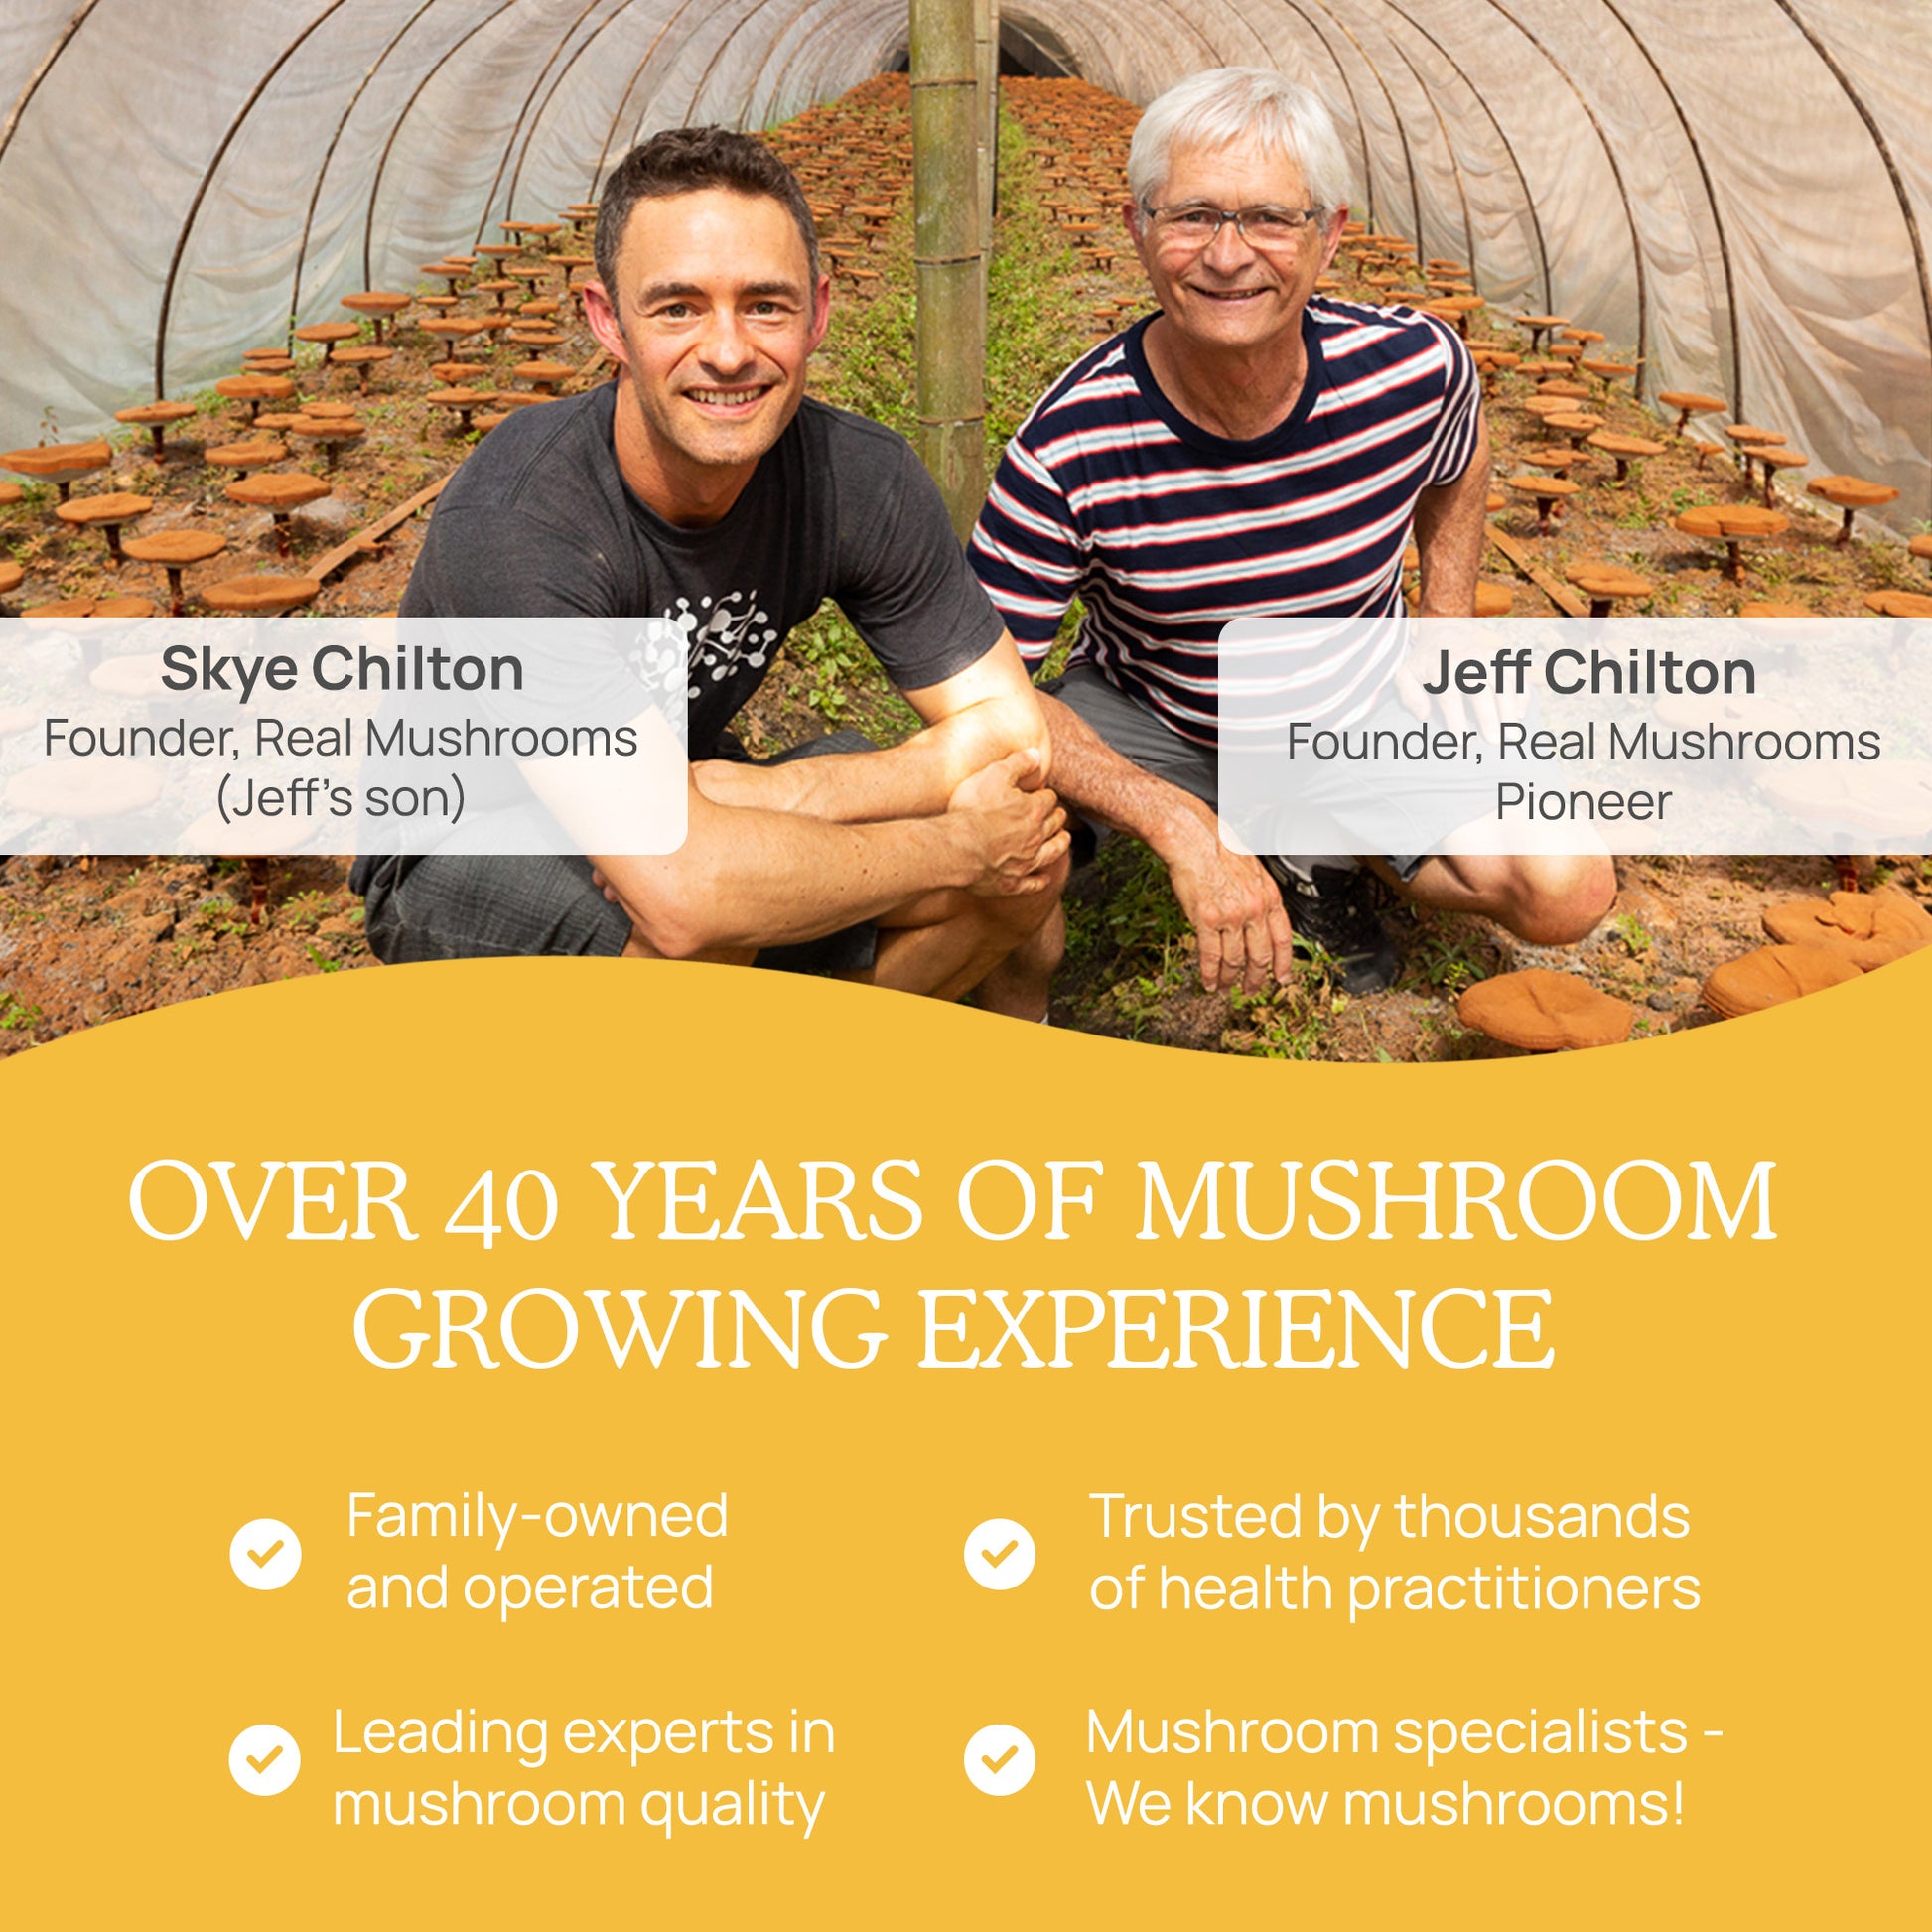 Two men smiling inside an organic mushroom cultivation greenhouse, identified as Skye Chilton, the founder's son, and Jeff Chilton, the pioneer of Real Mushrooms, a family-owned mushroom business with over 40 years